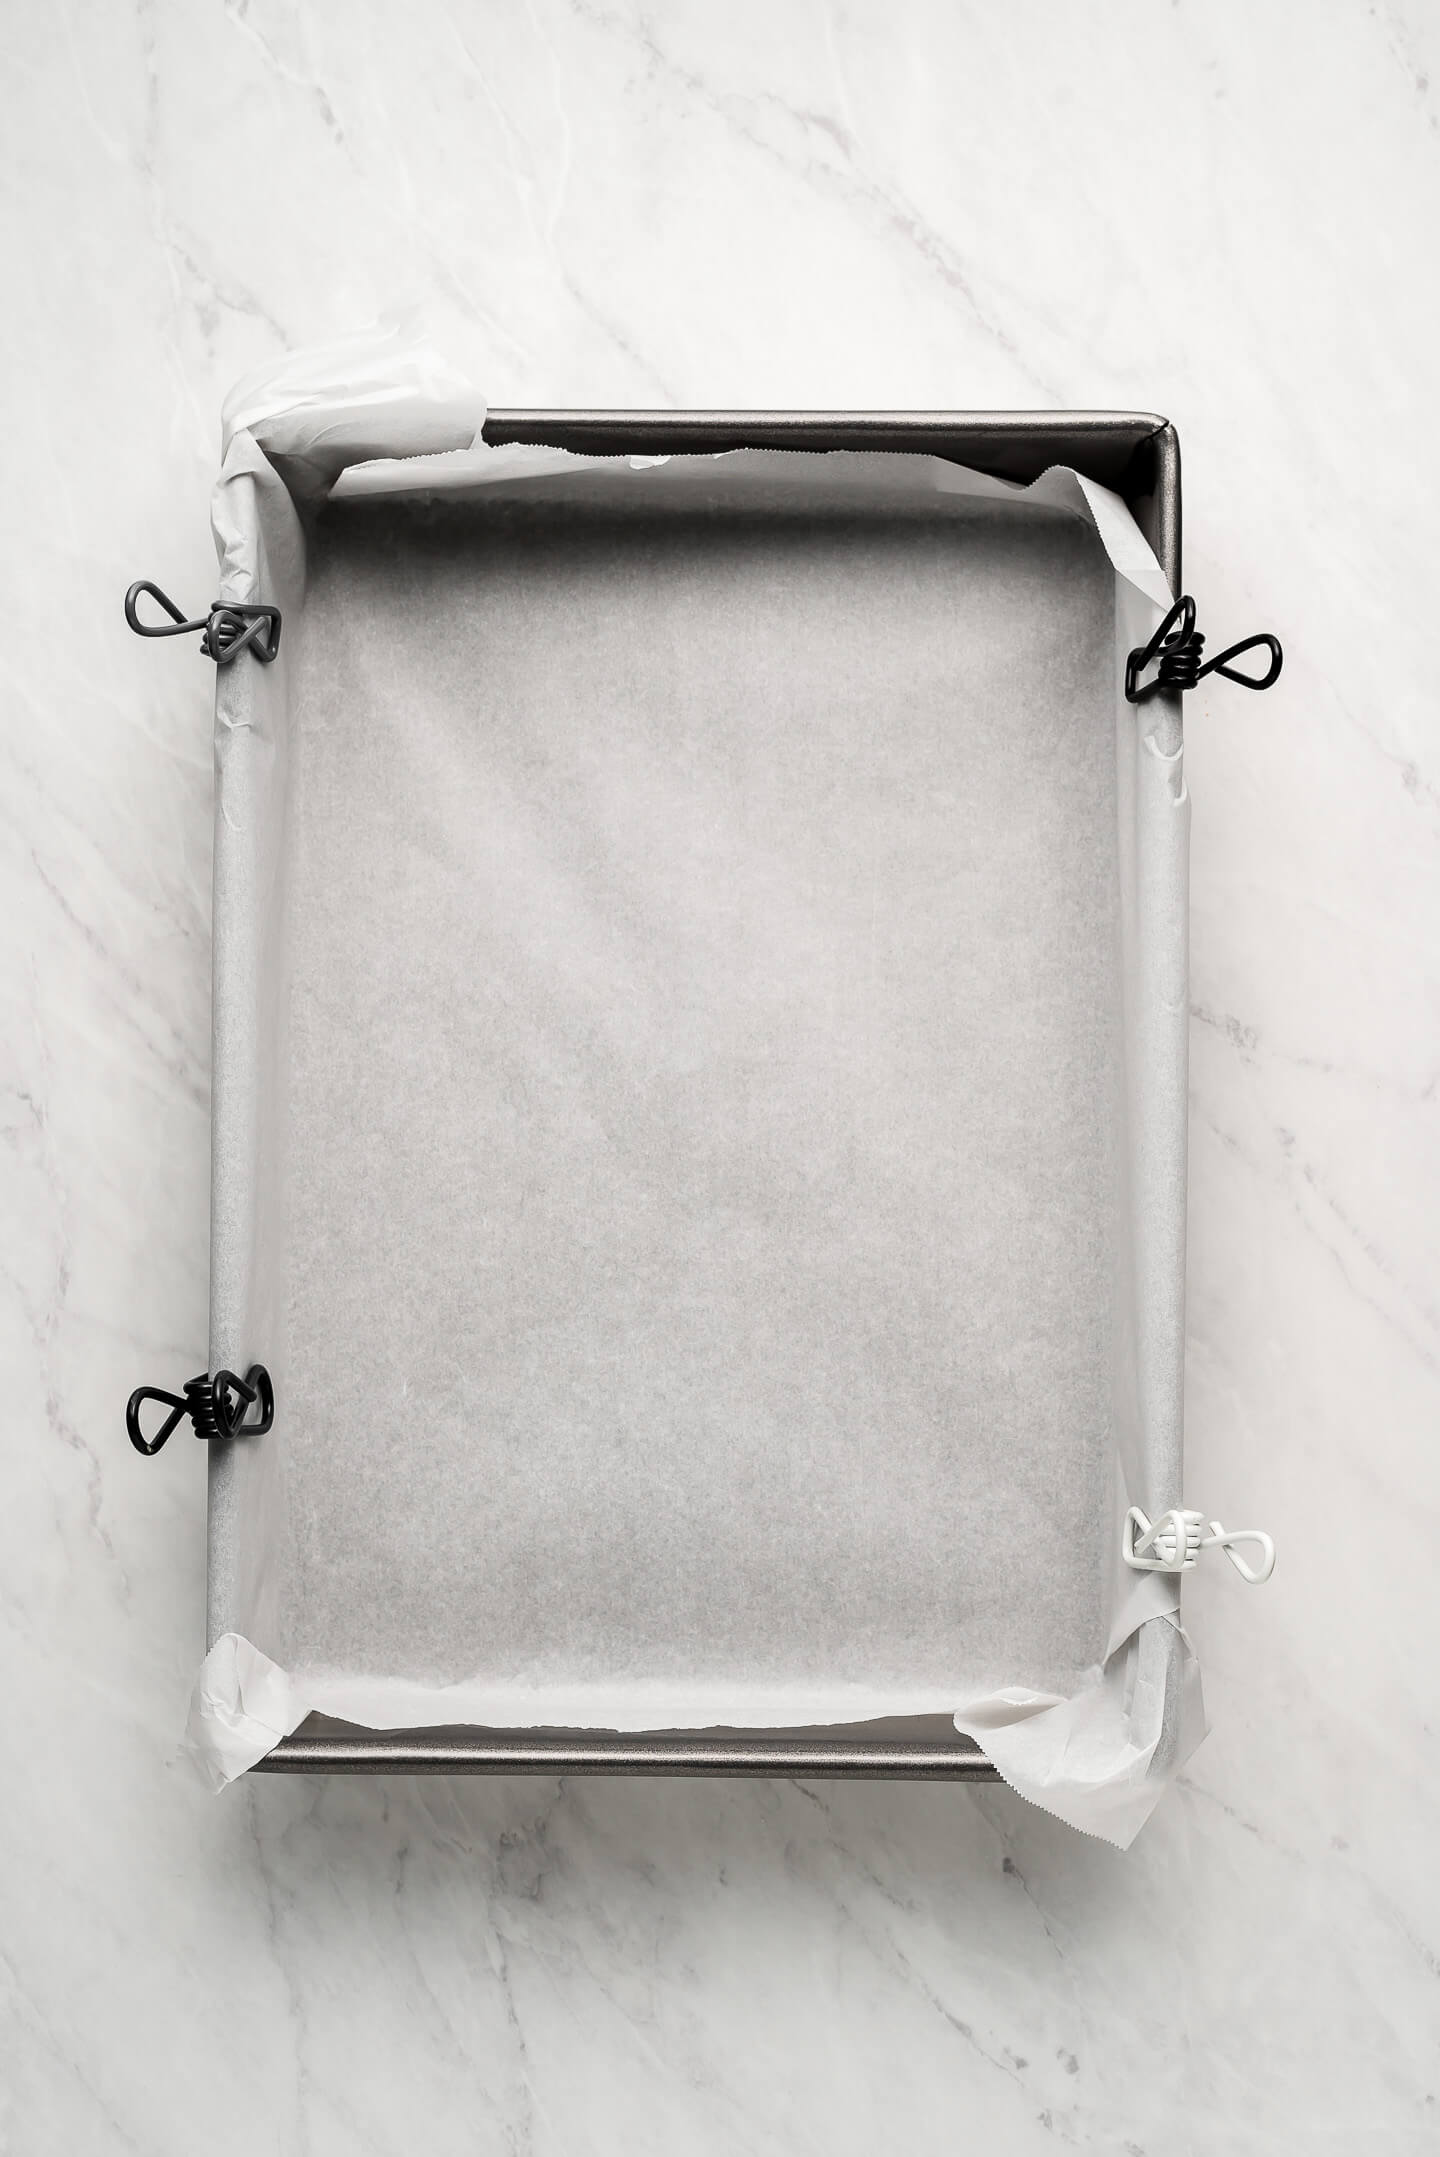 9x13 inch pan lined with parchment paper with chip clips holding it on the sides.